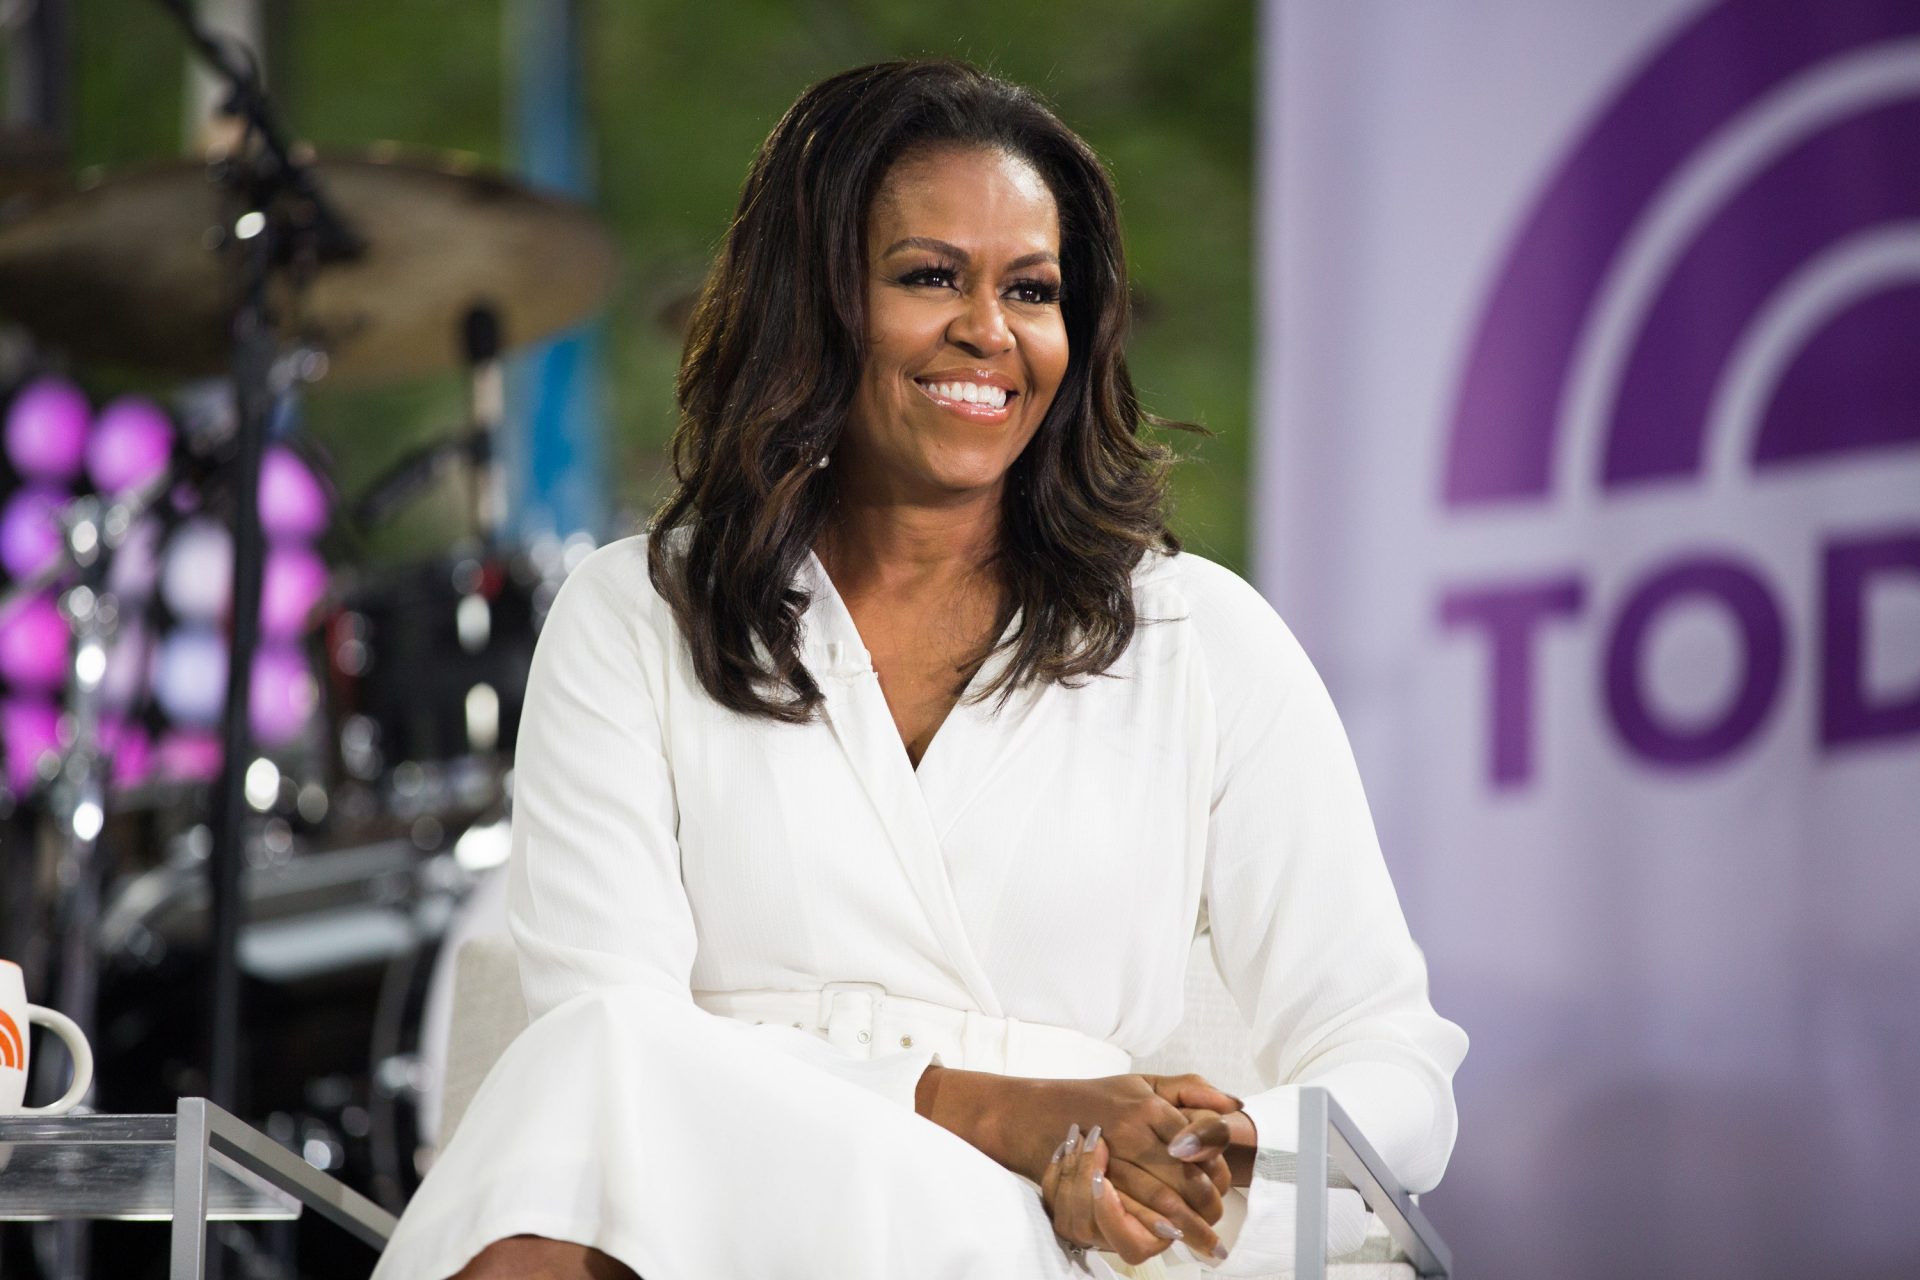 Jimmy Kimmel Asked Michelle Obama About Her Sex Lifestyles, and She Had the Simplest Response